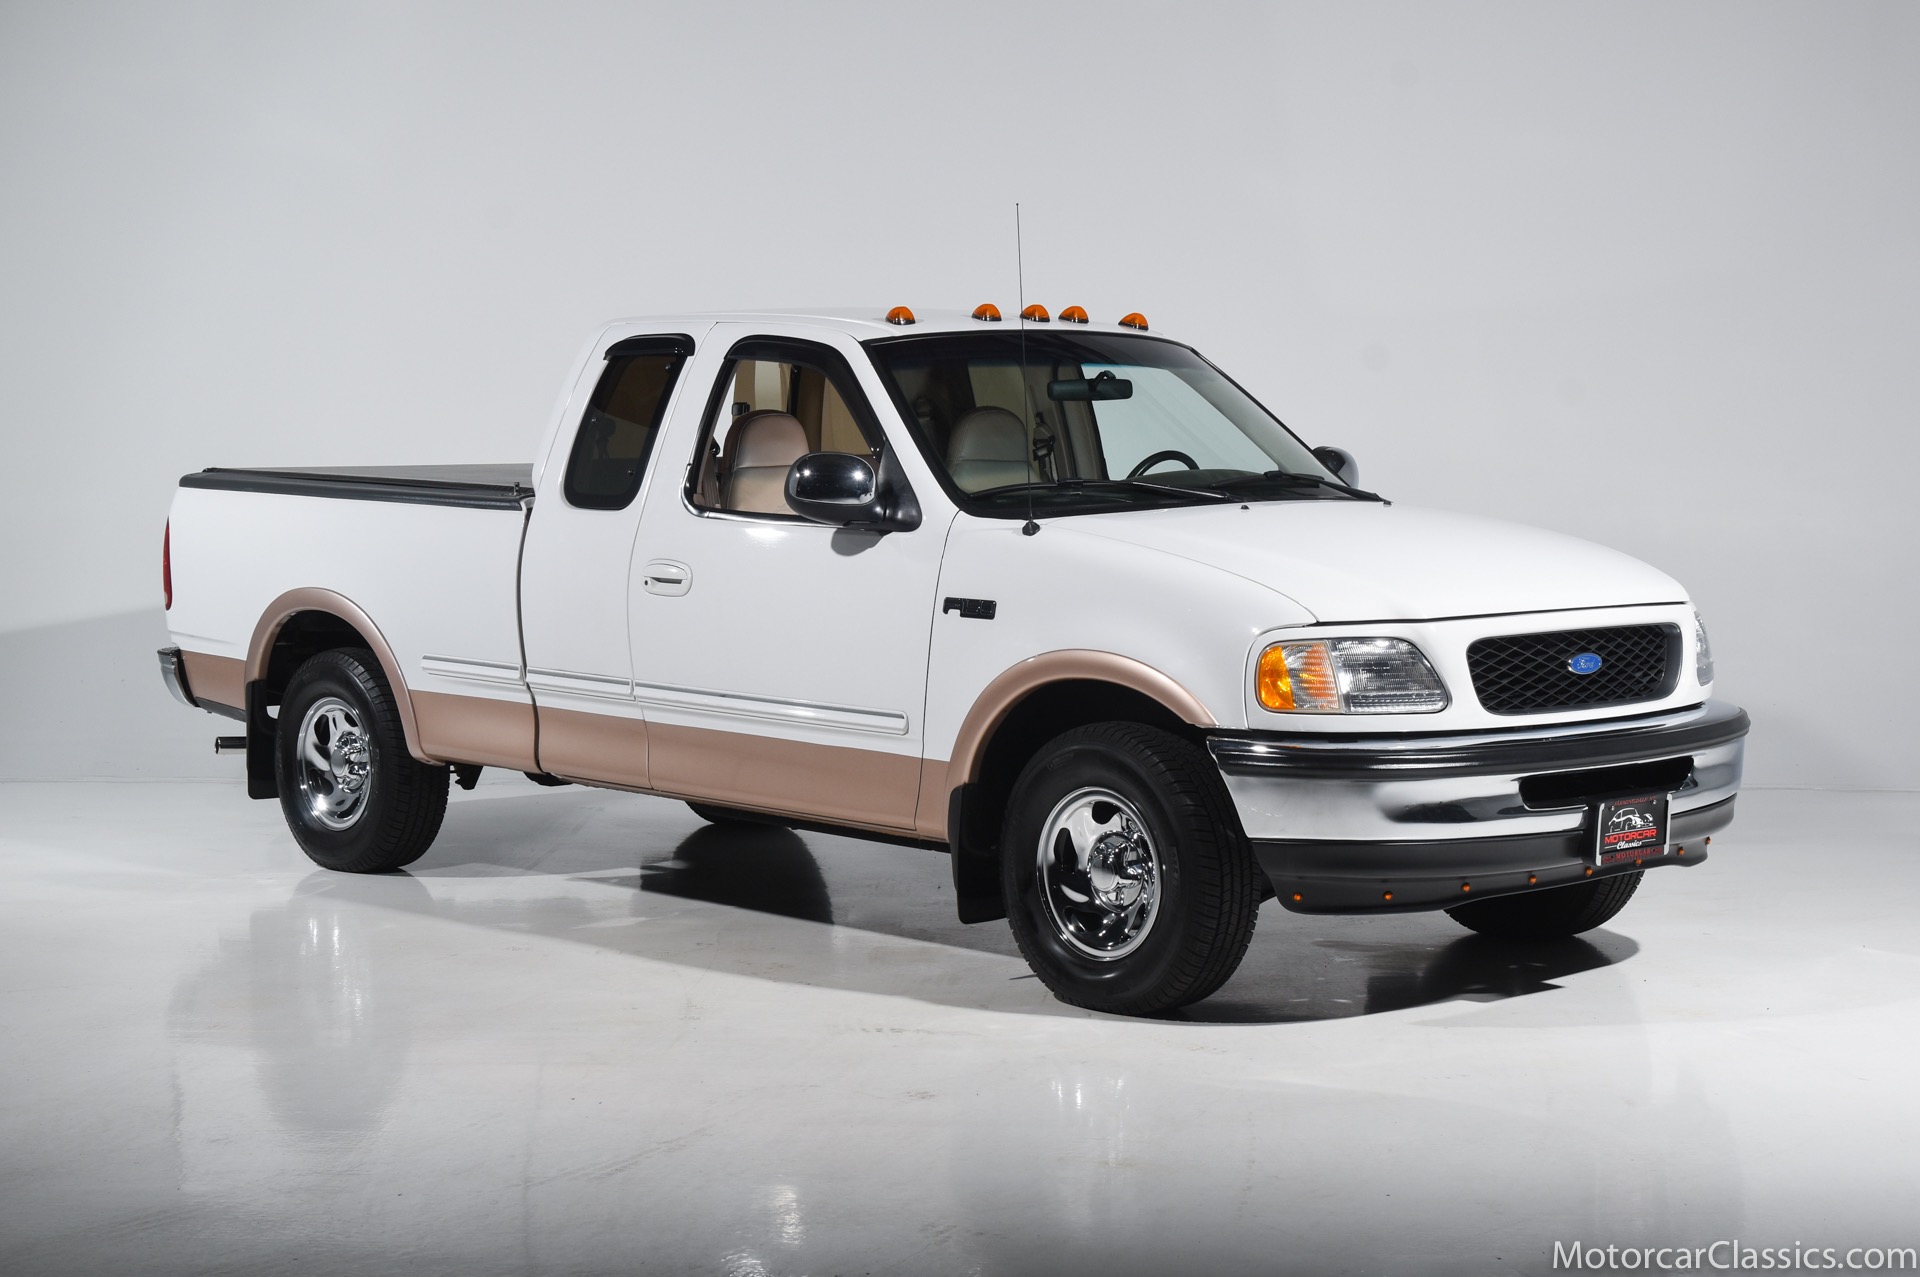 Used 1997 Ford F-150 Lariat For Sale ($19,900) | Motorcar Classics Stock  #2125